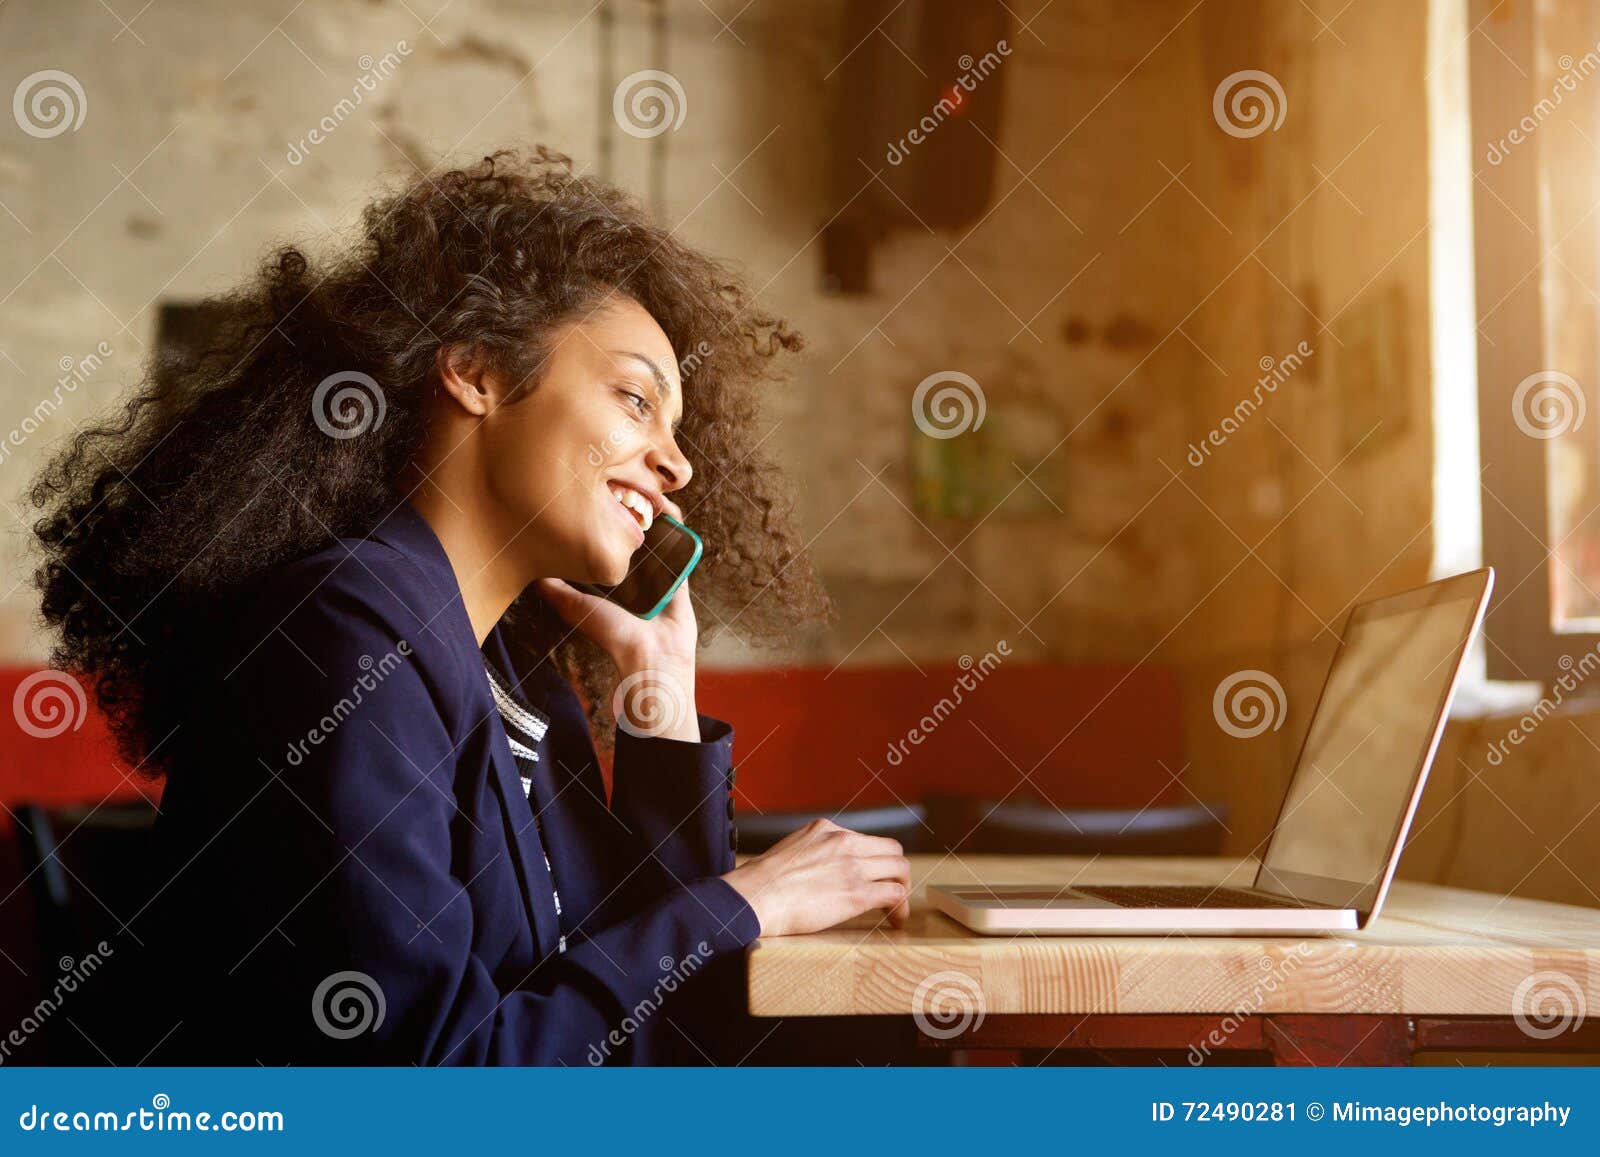 young african woman relaxing in cafe and making phone call